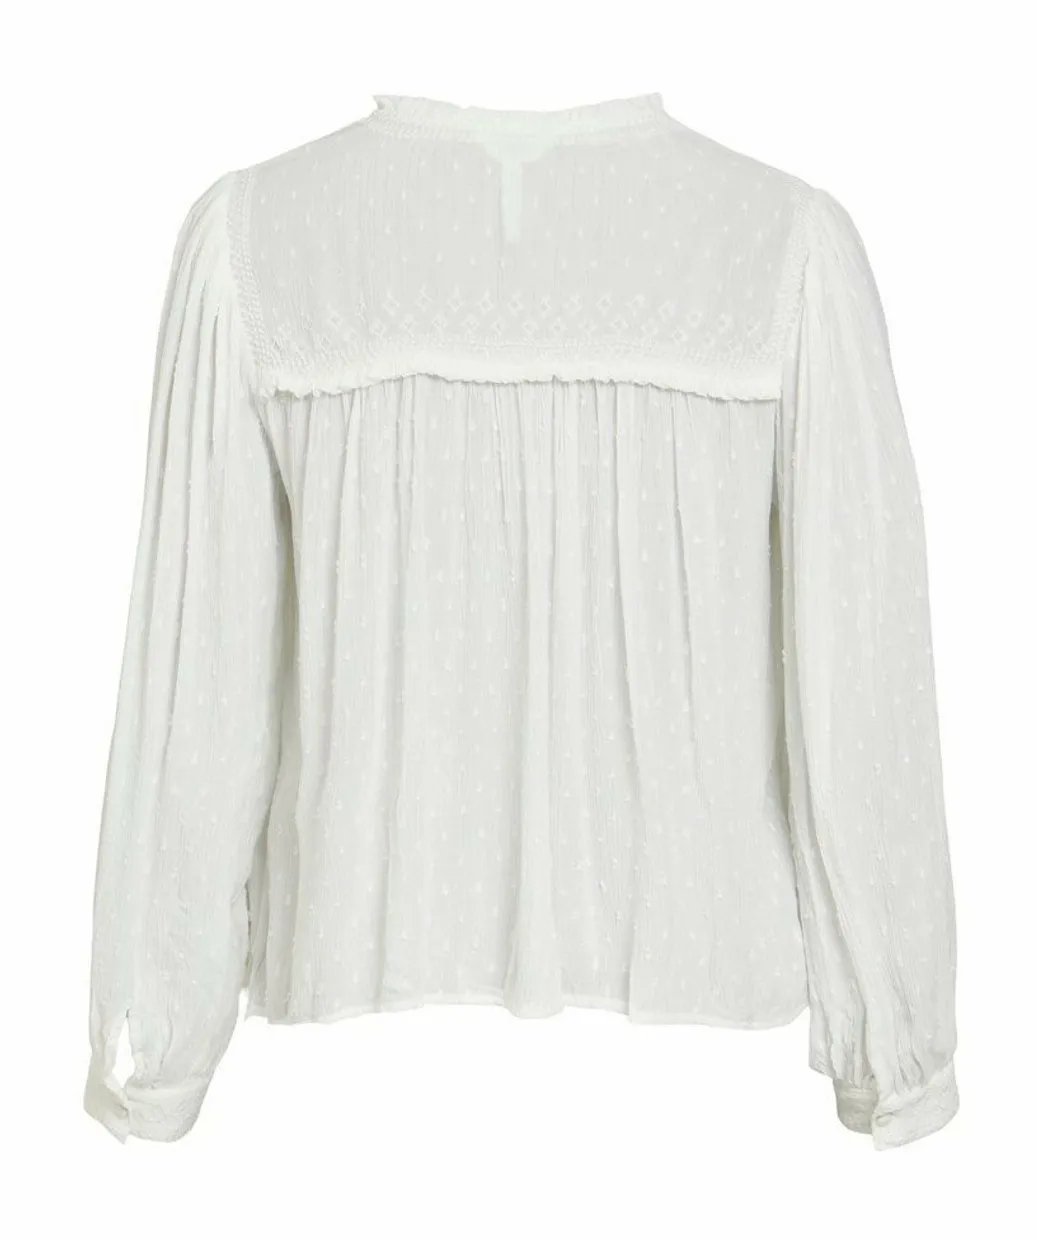 Lee embroidery blouse white